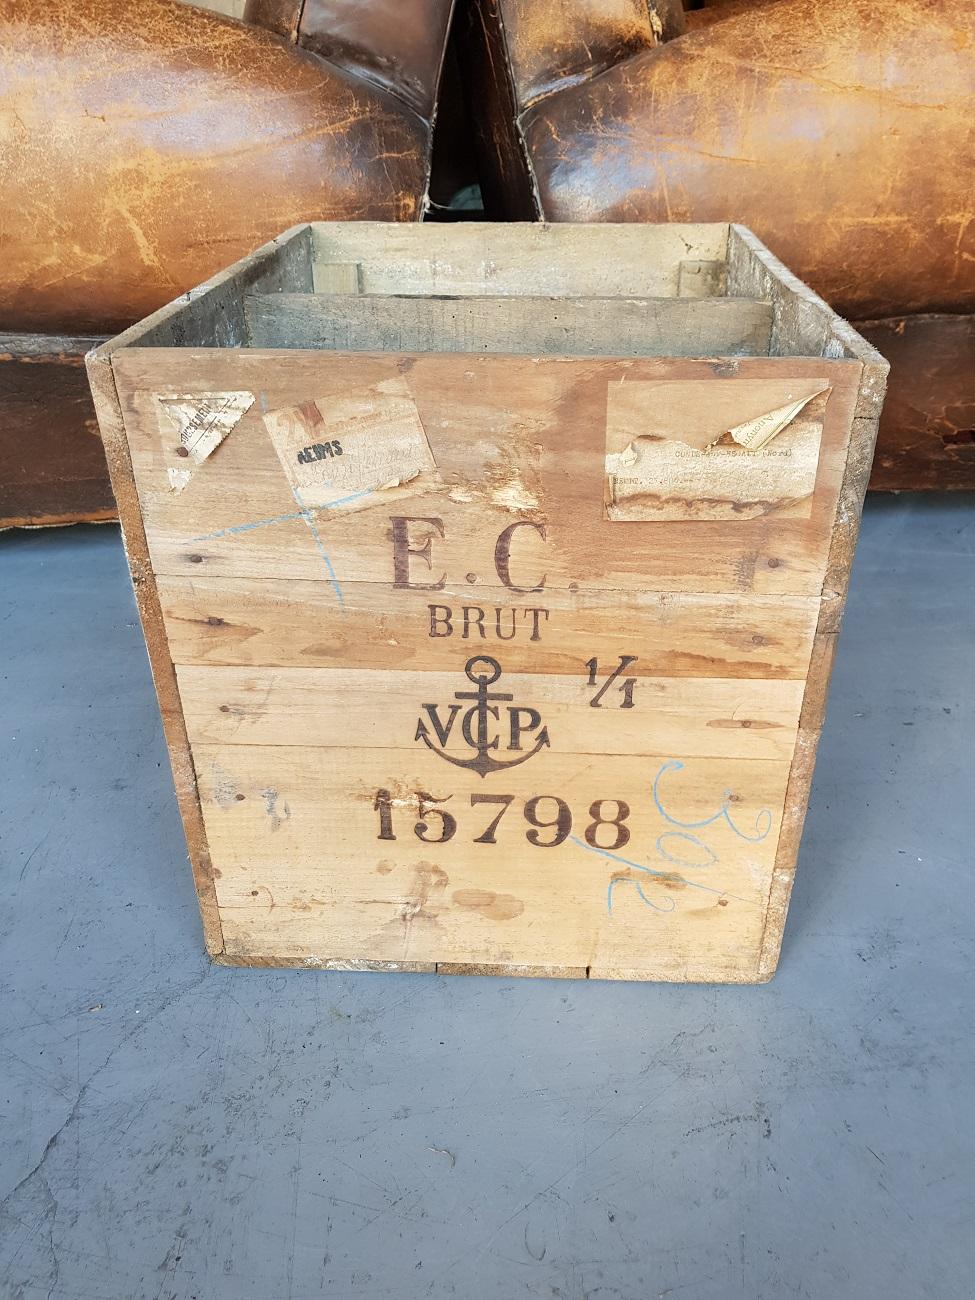 Beautiful old wooden French Veuve Clicquot Ponsardin champagne bottles box from the 1950s or older.

The measurements are,
Depth 39.5 cm/ 15.5 inch.
Width 47 cm/ 18.5 inch.
Height 42 cm/ 16.5 inch.